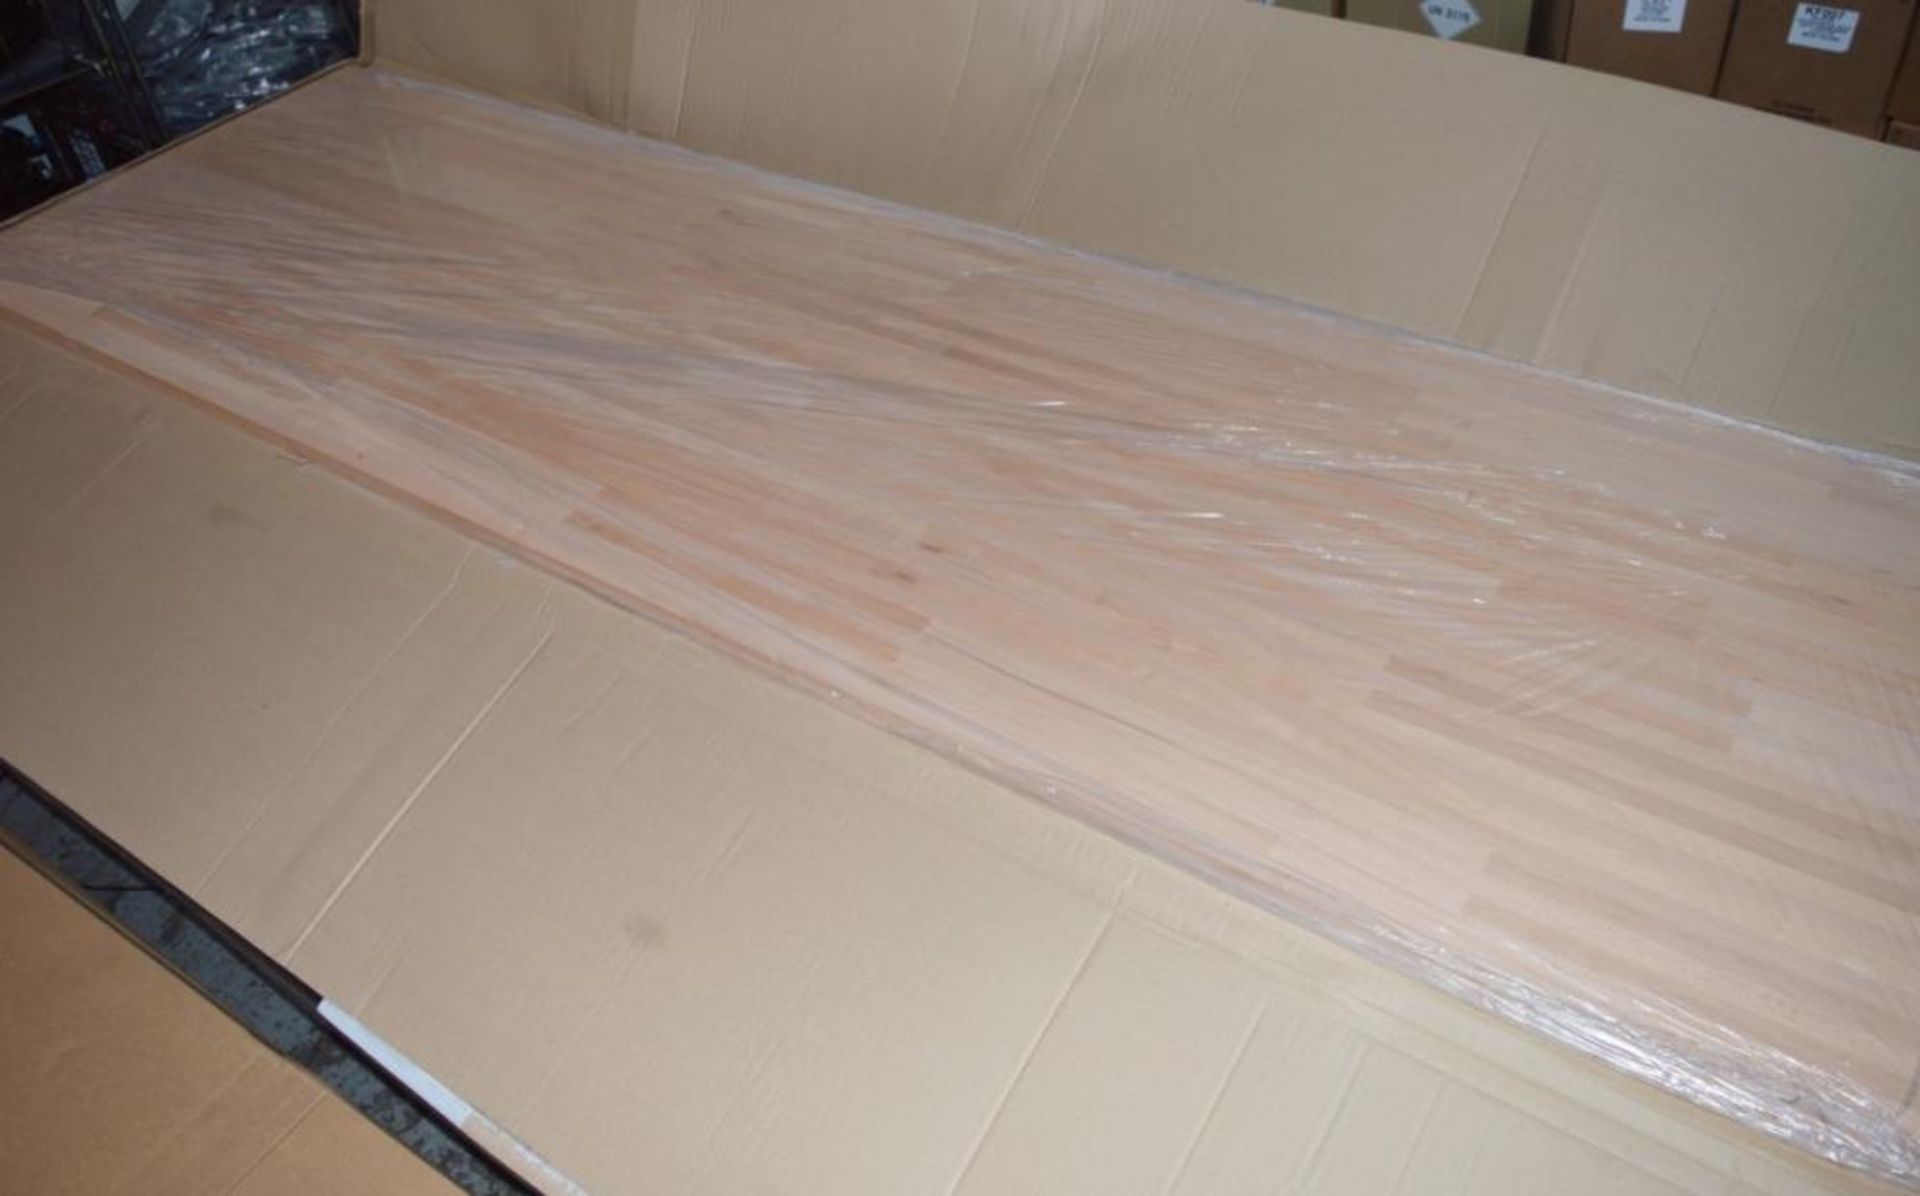 1 x Solid Wood Kitchen Worktop - PRIME BEECH - First Grade Finger Jointed Kitchen Worktop - Size: 20 - Image 3 of 5